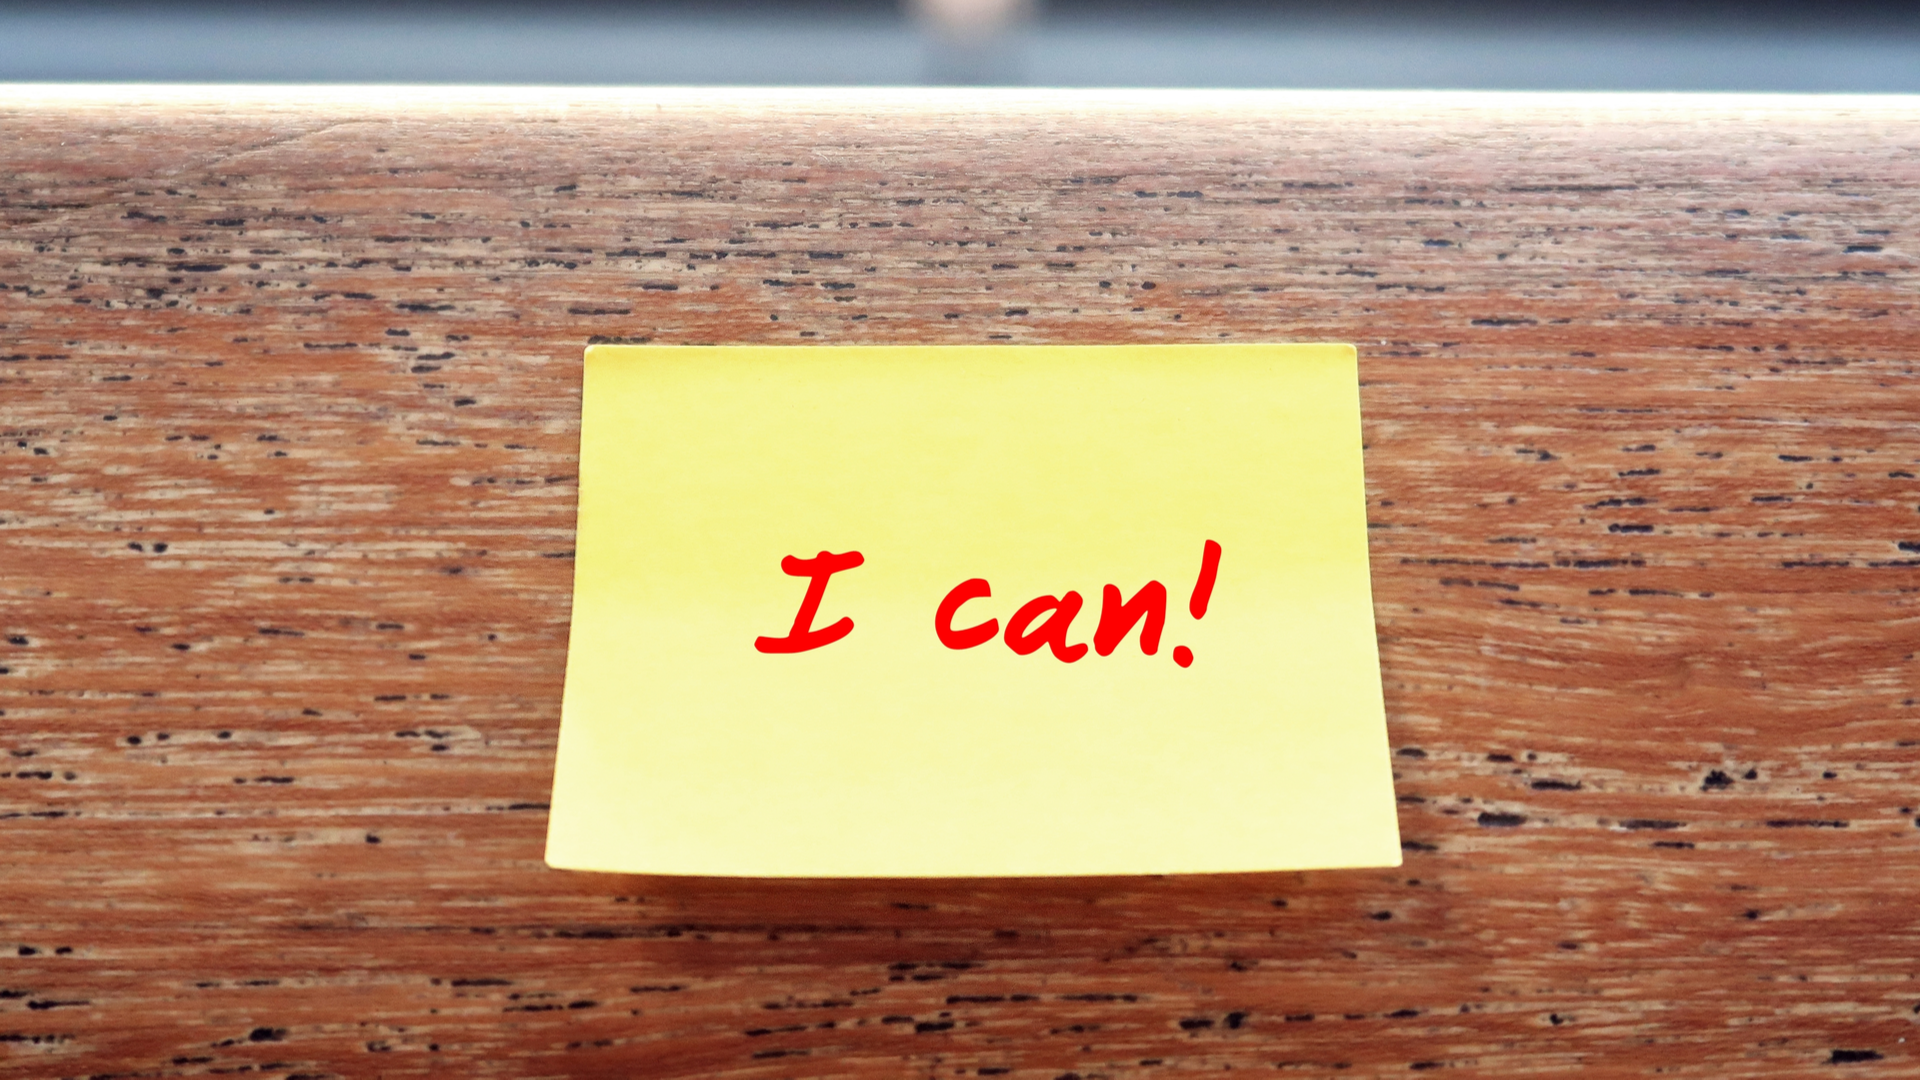 I can do it affirmation